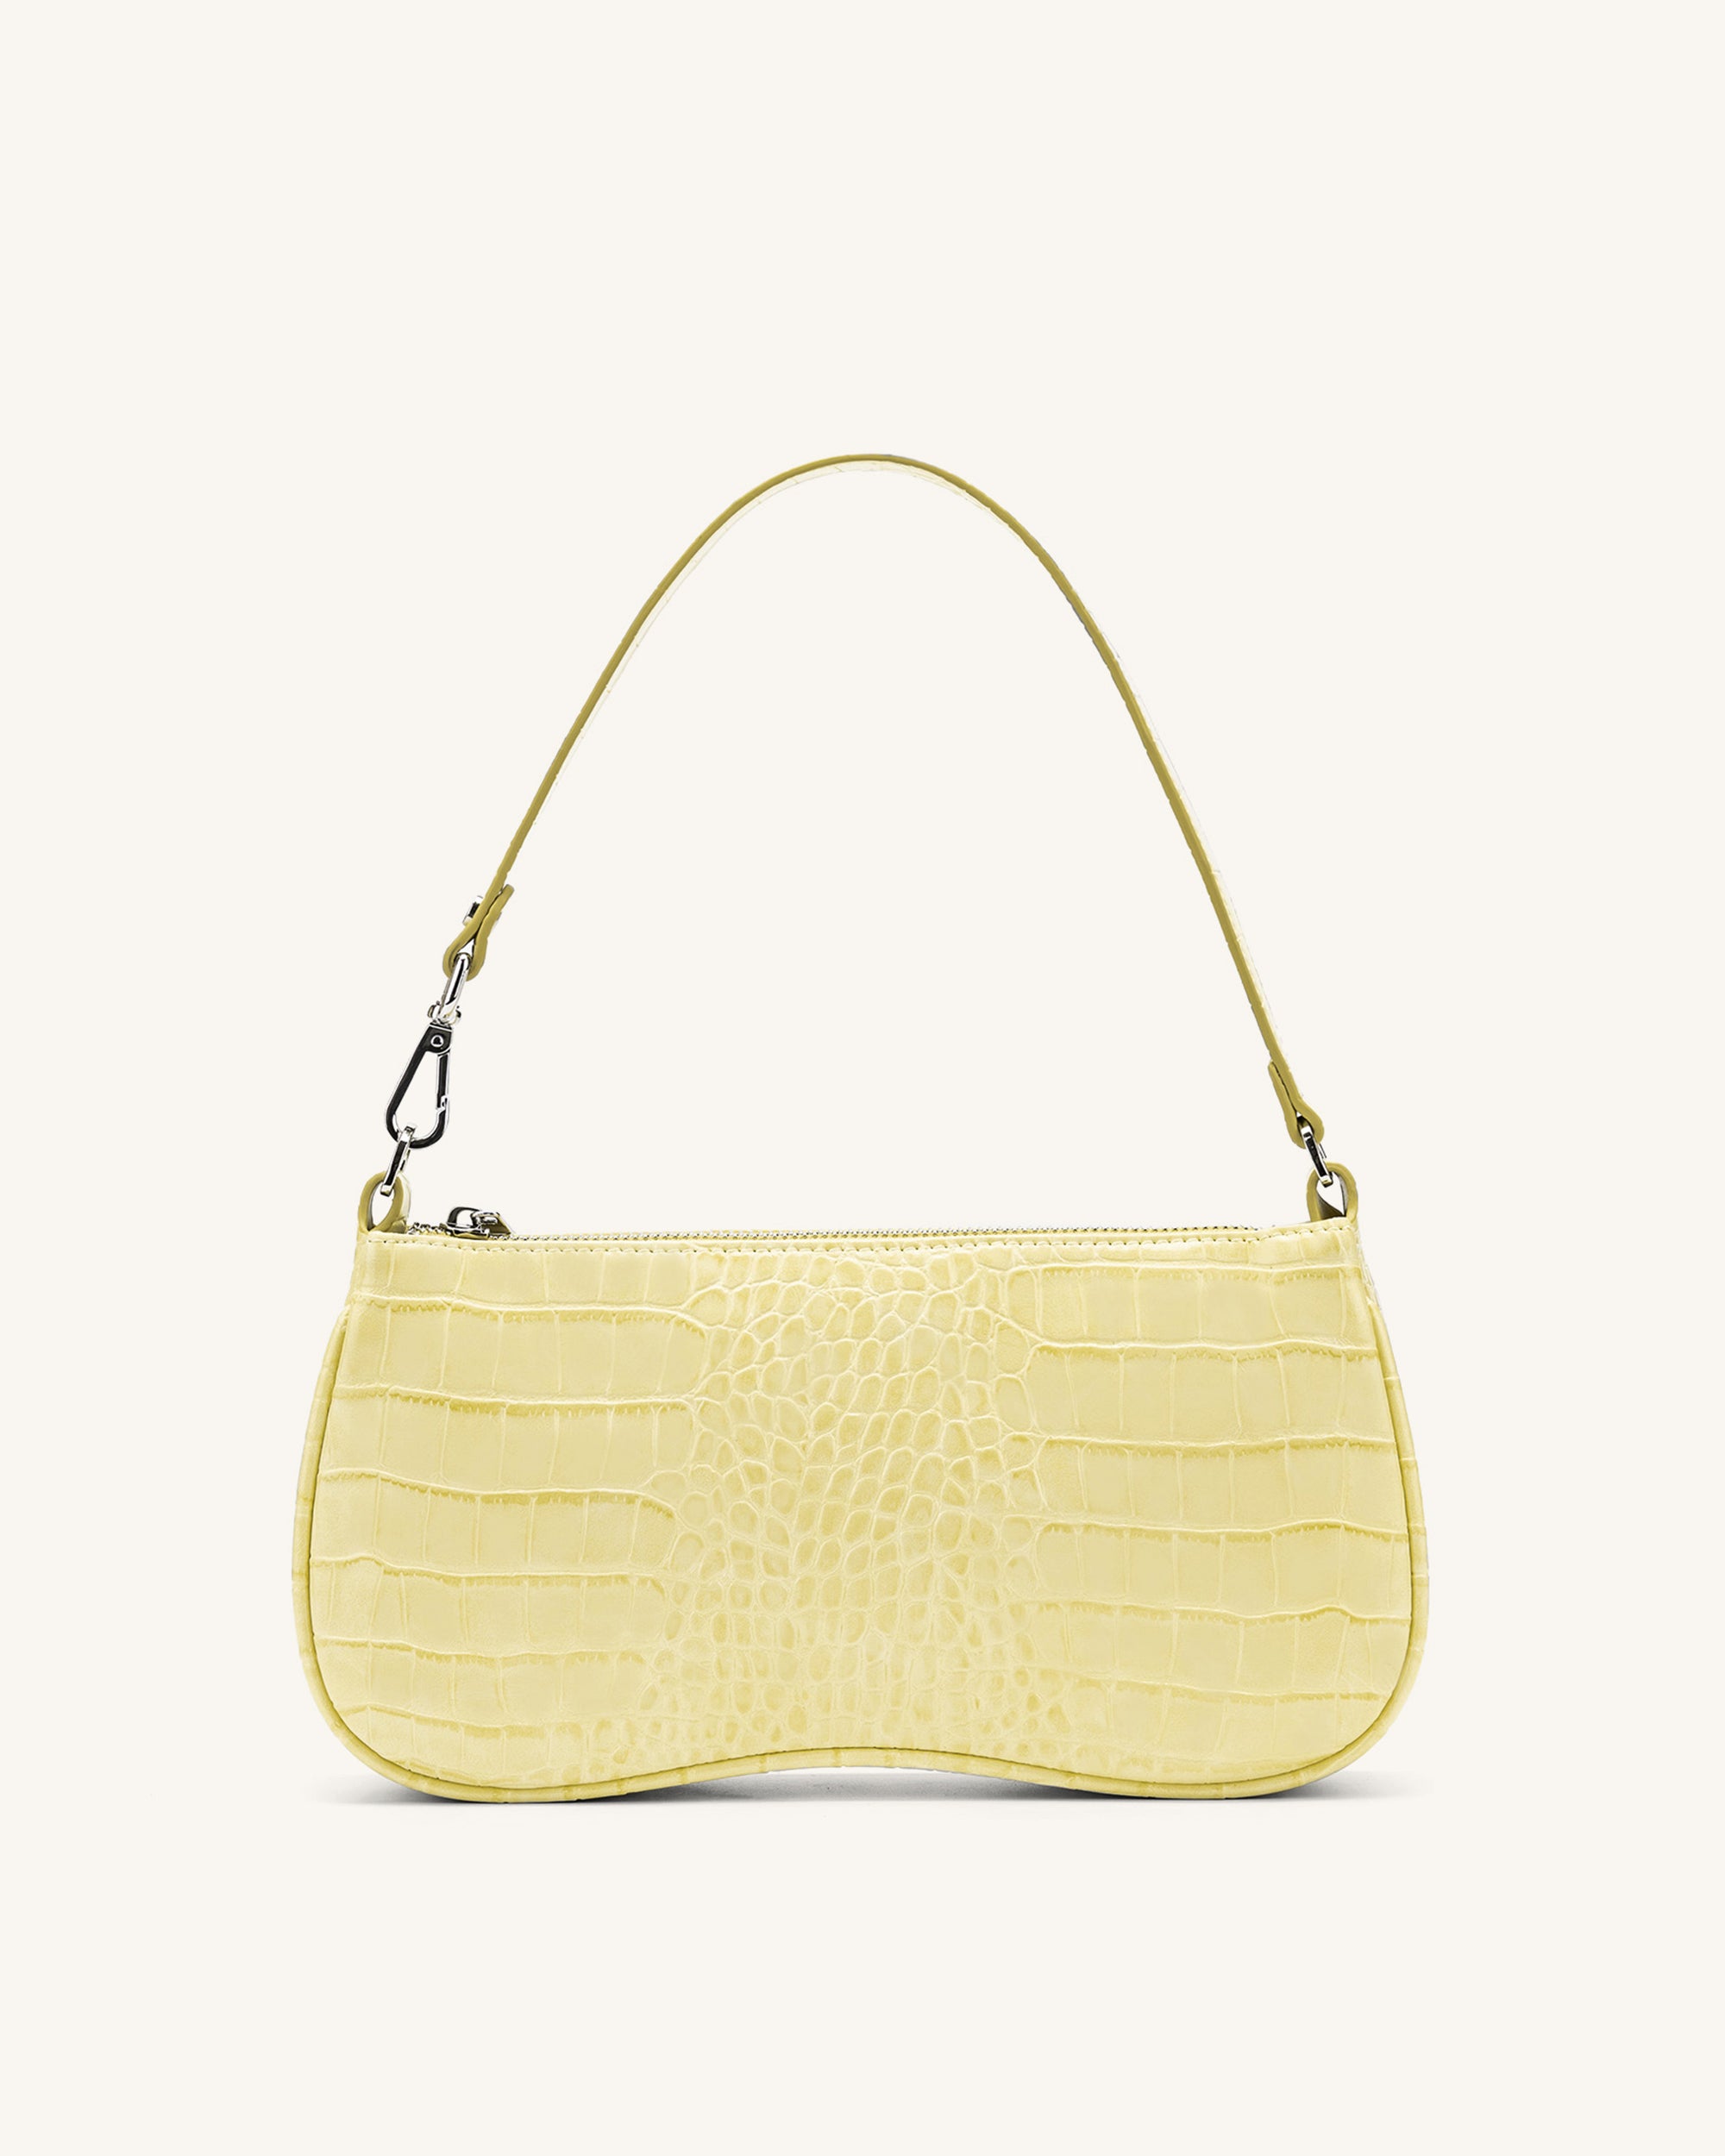 Pale yellow leather hand bag with embossed 